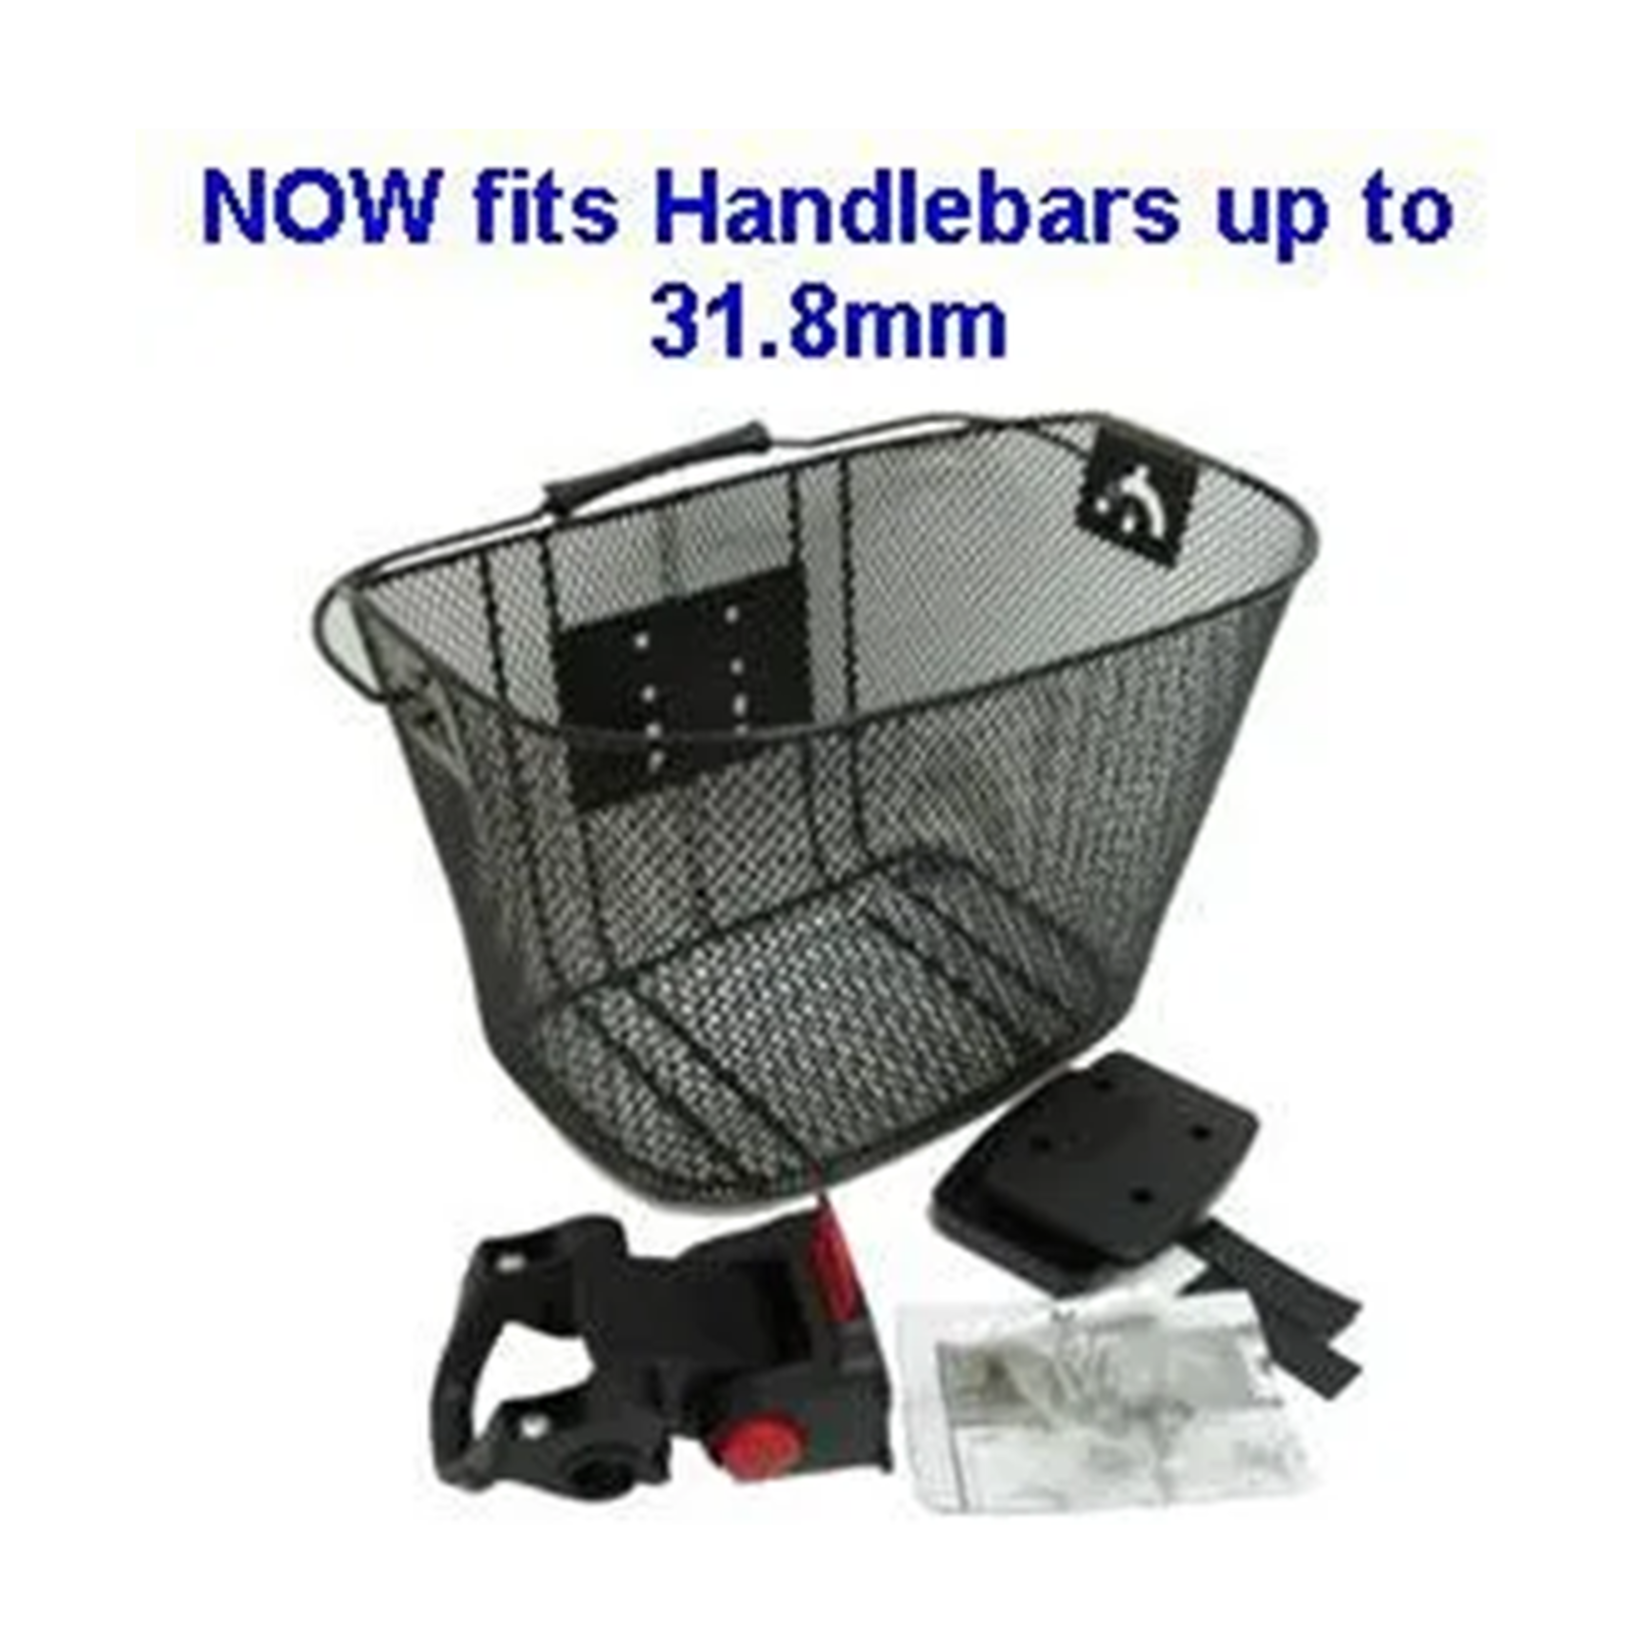 BASKET - Front, Mesh, With New Angle Adjustable Bracket, For Light Weight Cargo, Black, 25cm x 34cm x 25cm (25.4 to 31.8)